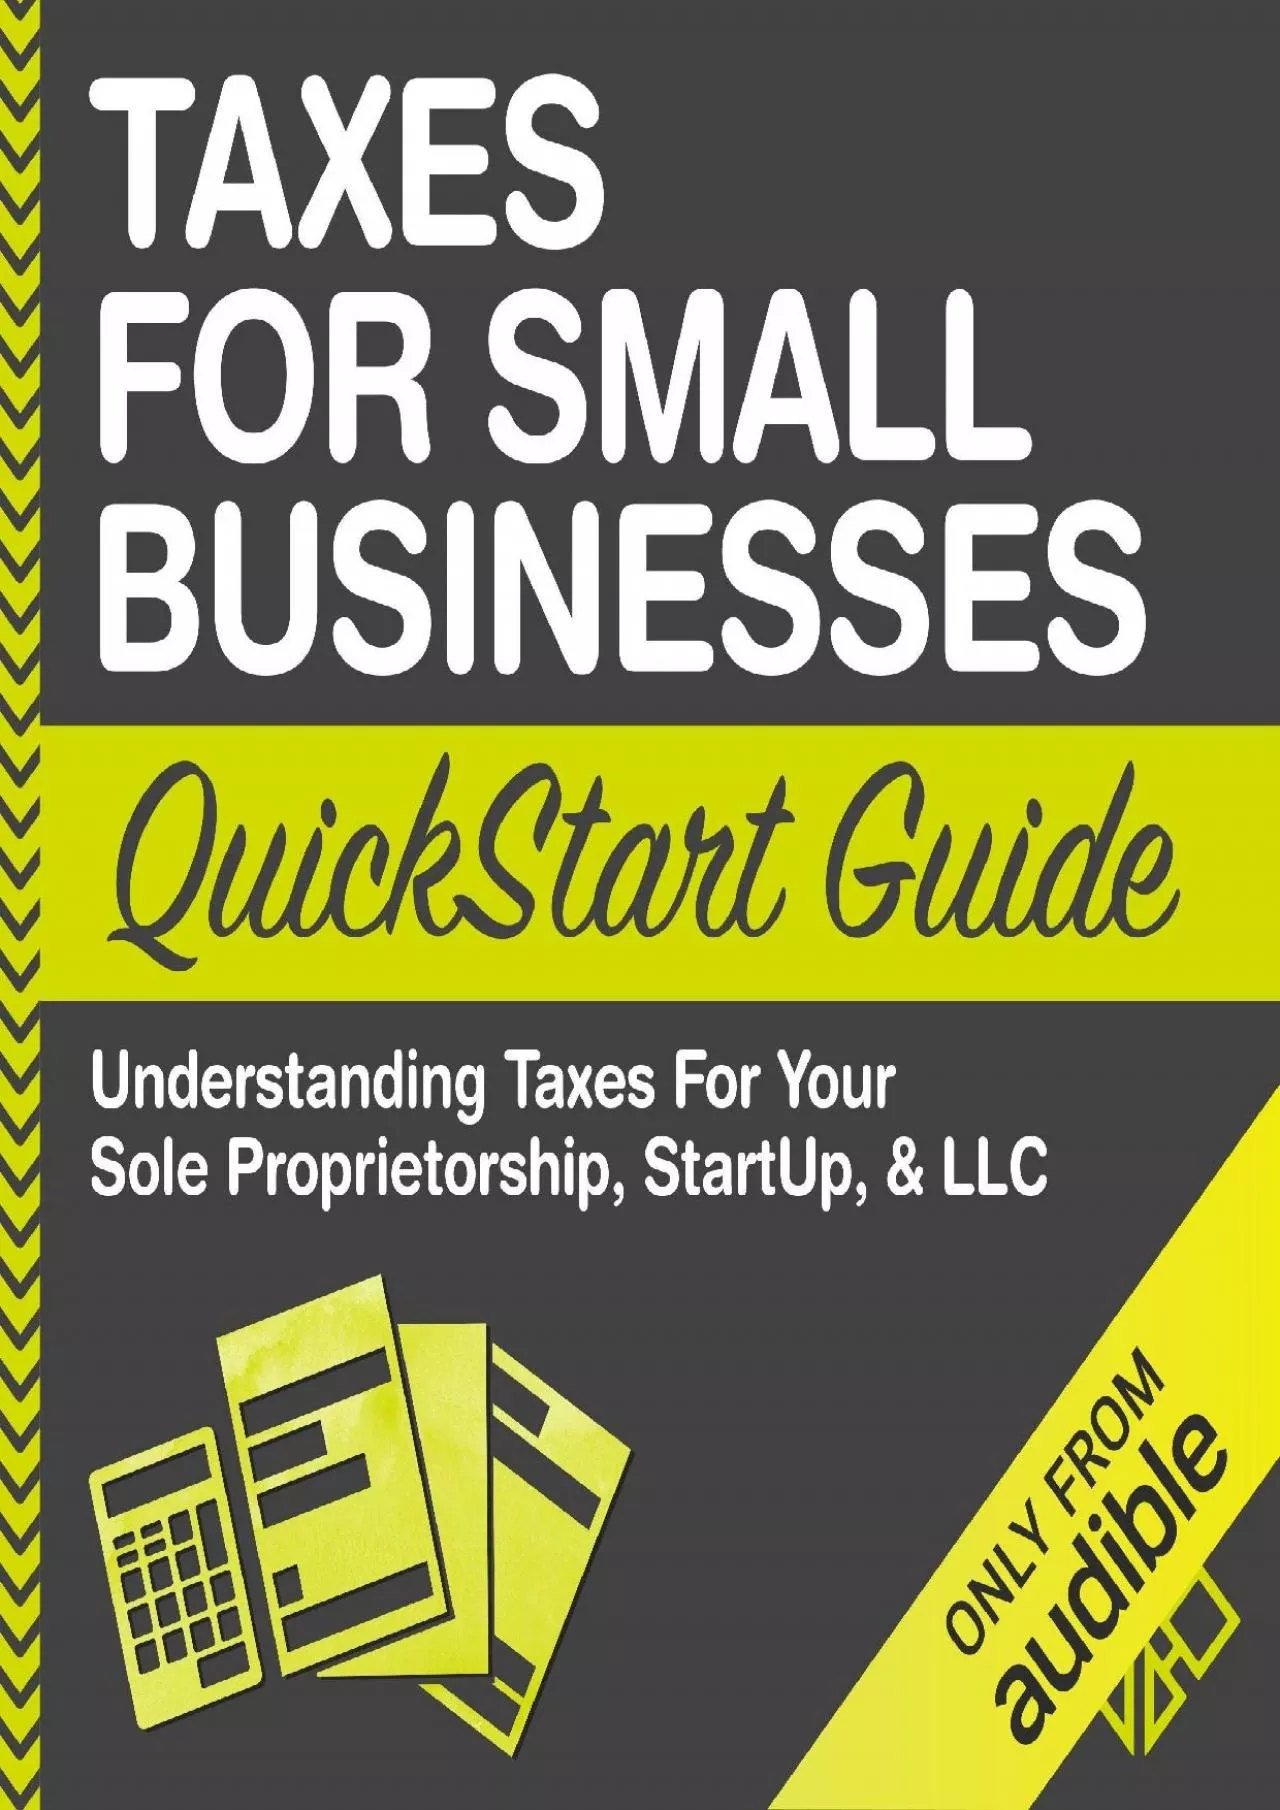 (EBOOK)-Taxes for Small Businesses QuickStart Guide - Understanding Taxes for Your Sole